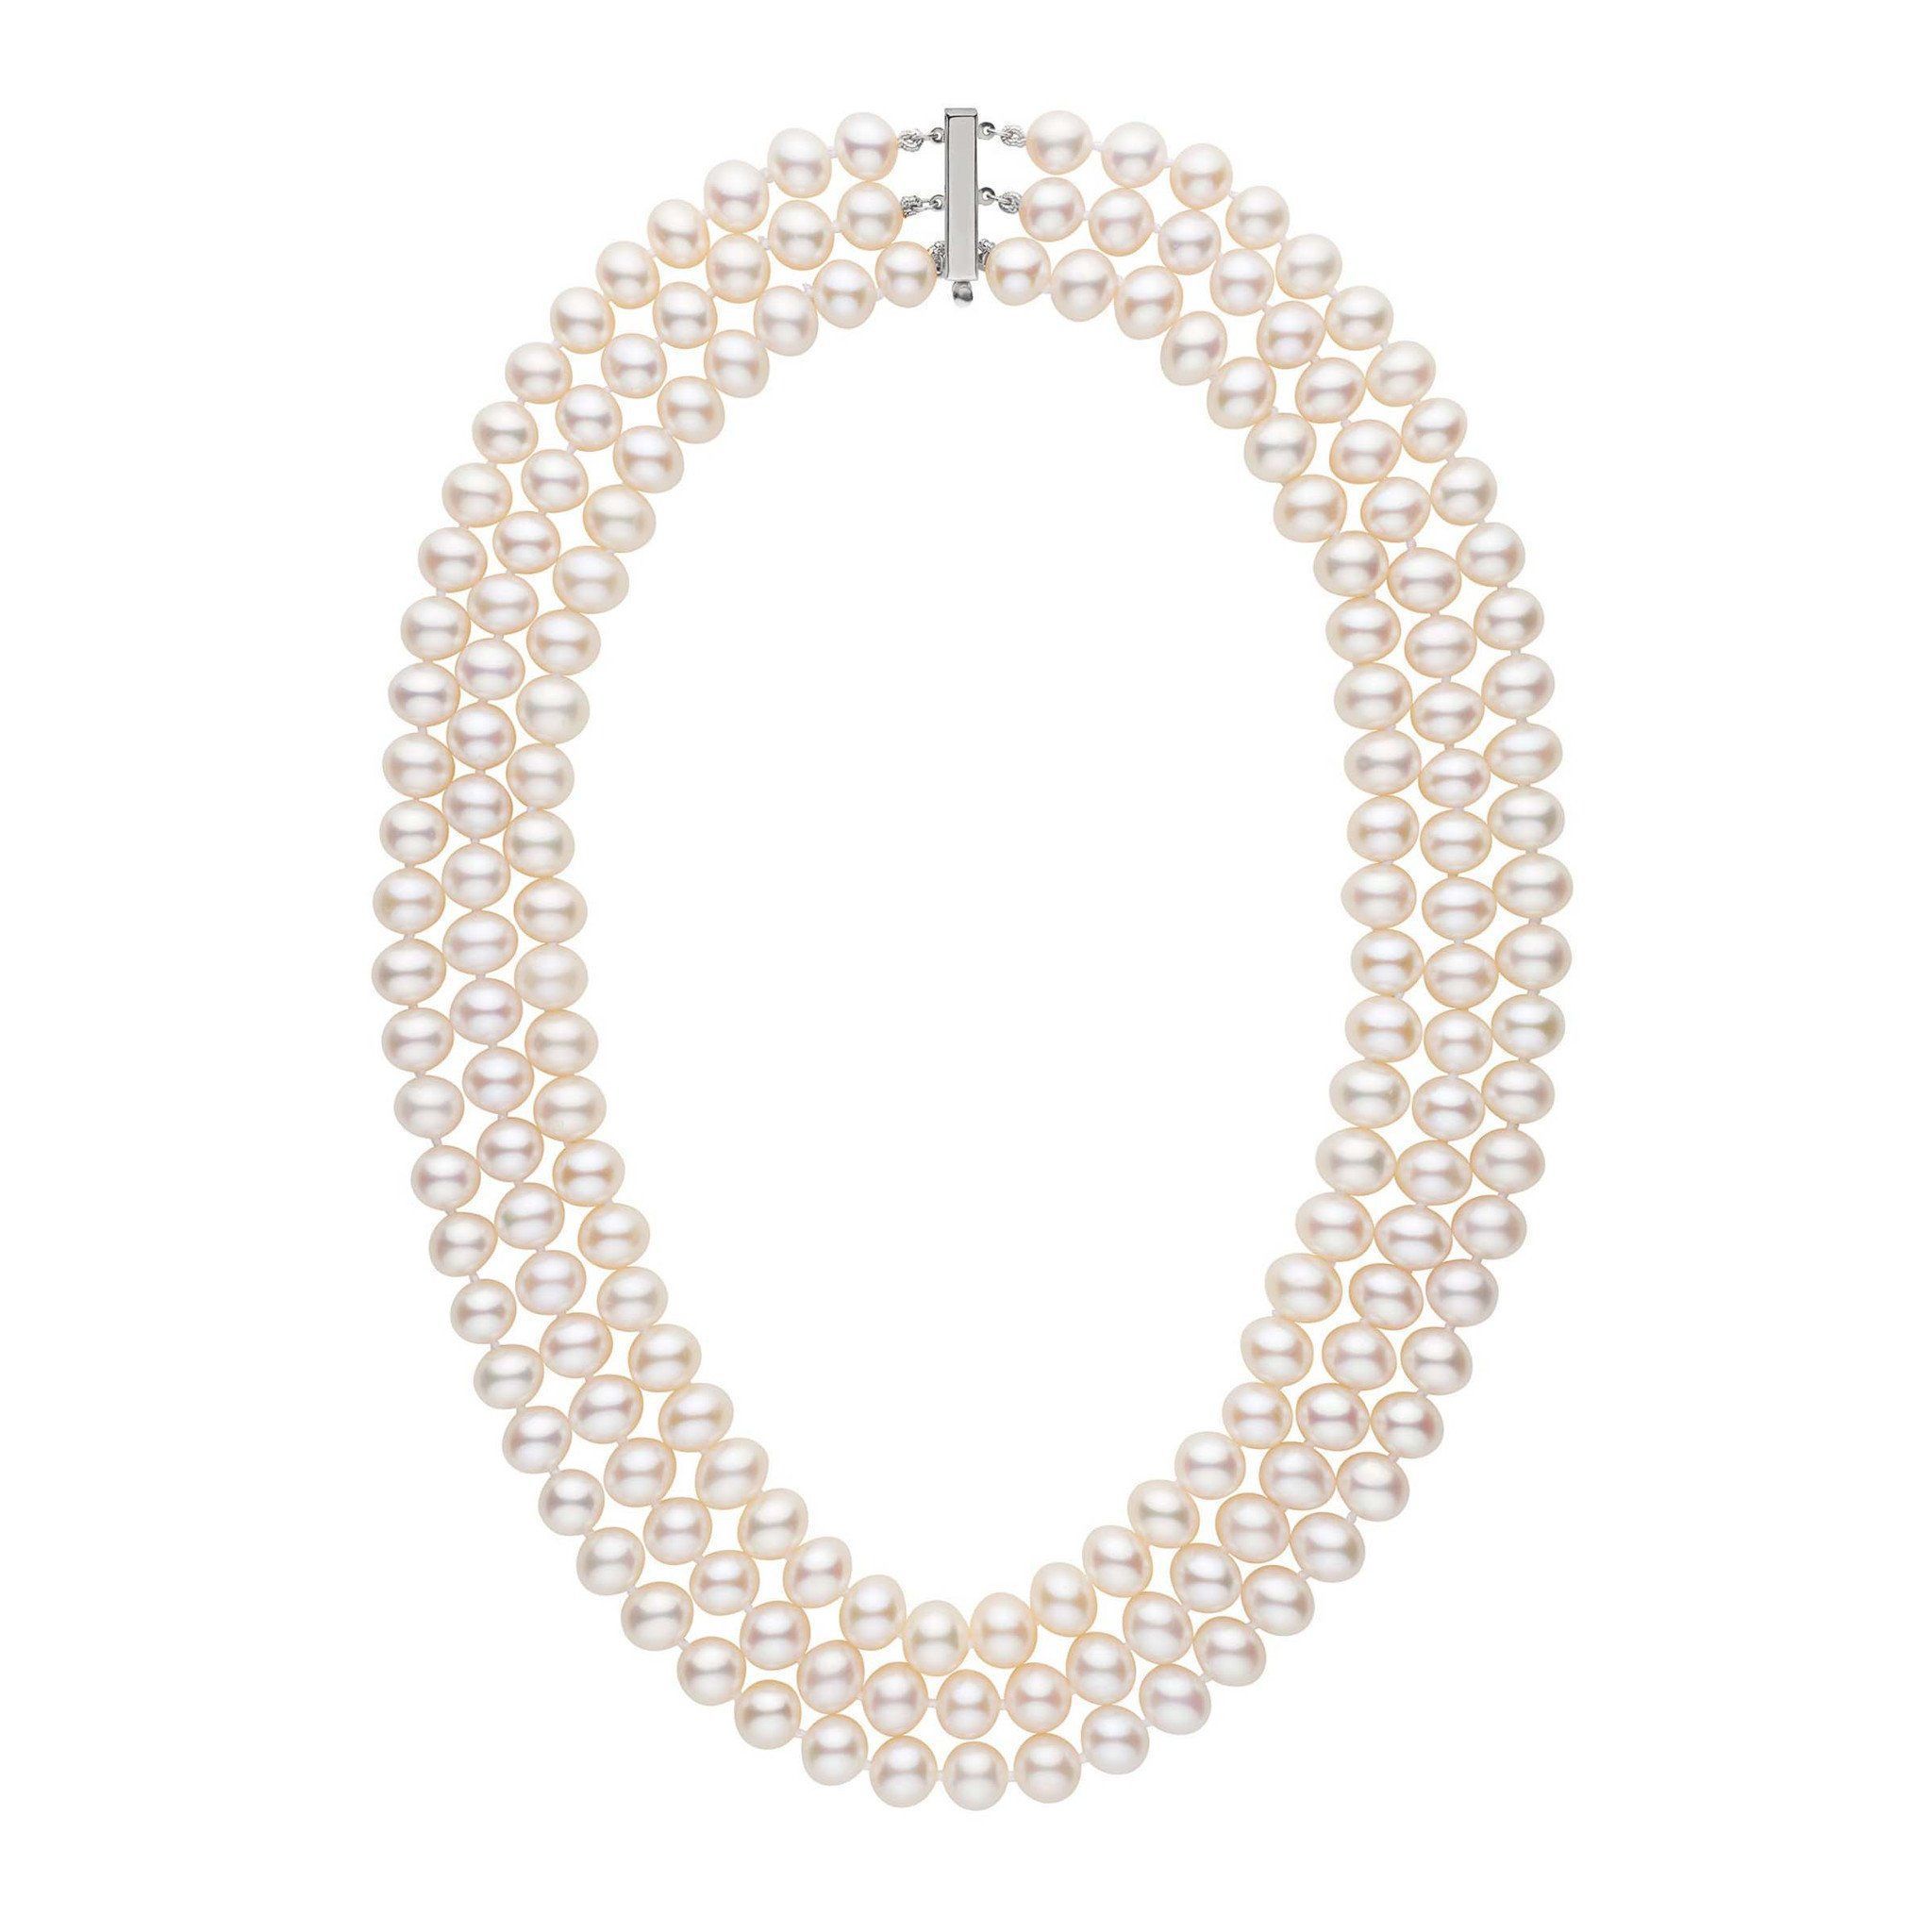 Triple Strand 8.5-9.0 mm AA+ White Freshwater Pearl Necklace